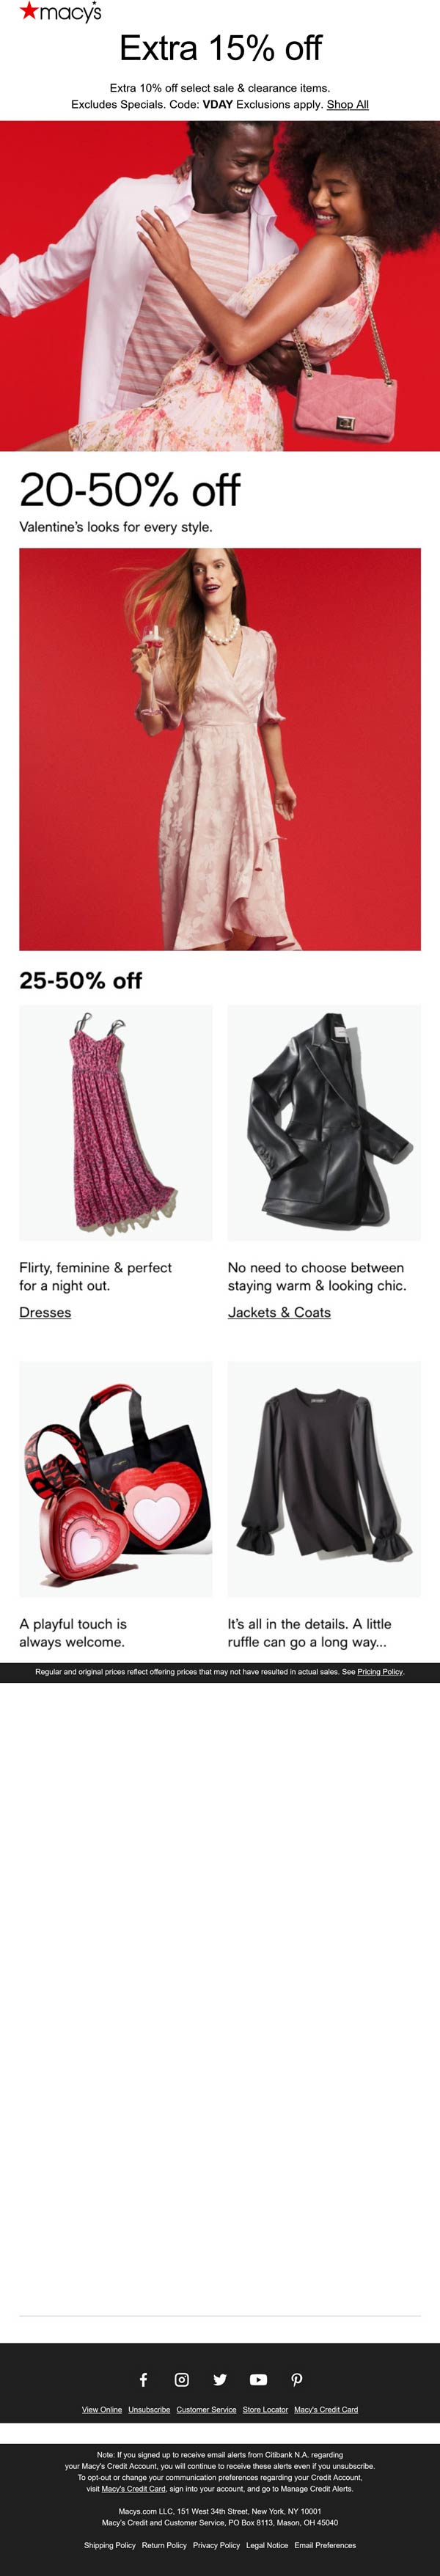 Macys stores Coupon  Extra 10-15% off sale items at Macys, or online via promo code VDAY #macys 